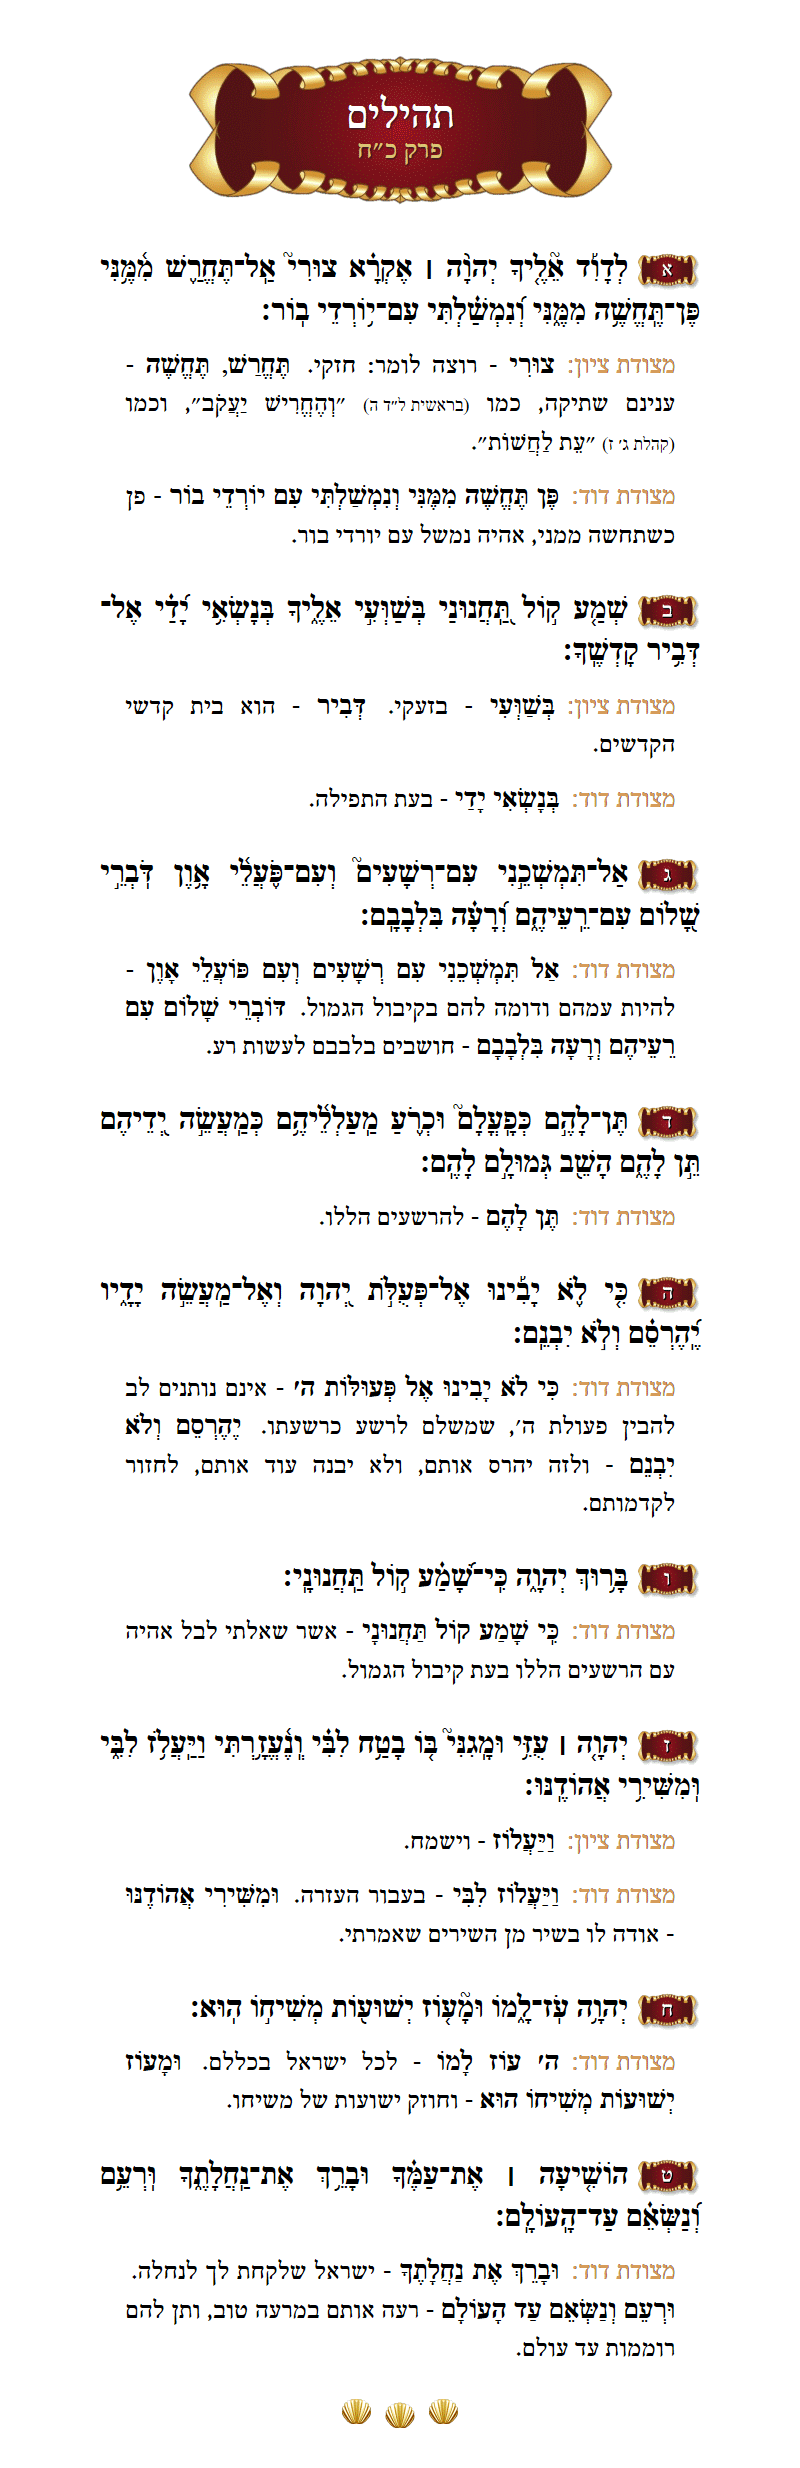 Sefer Tehillim Chapter 28 with commentary